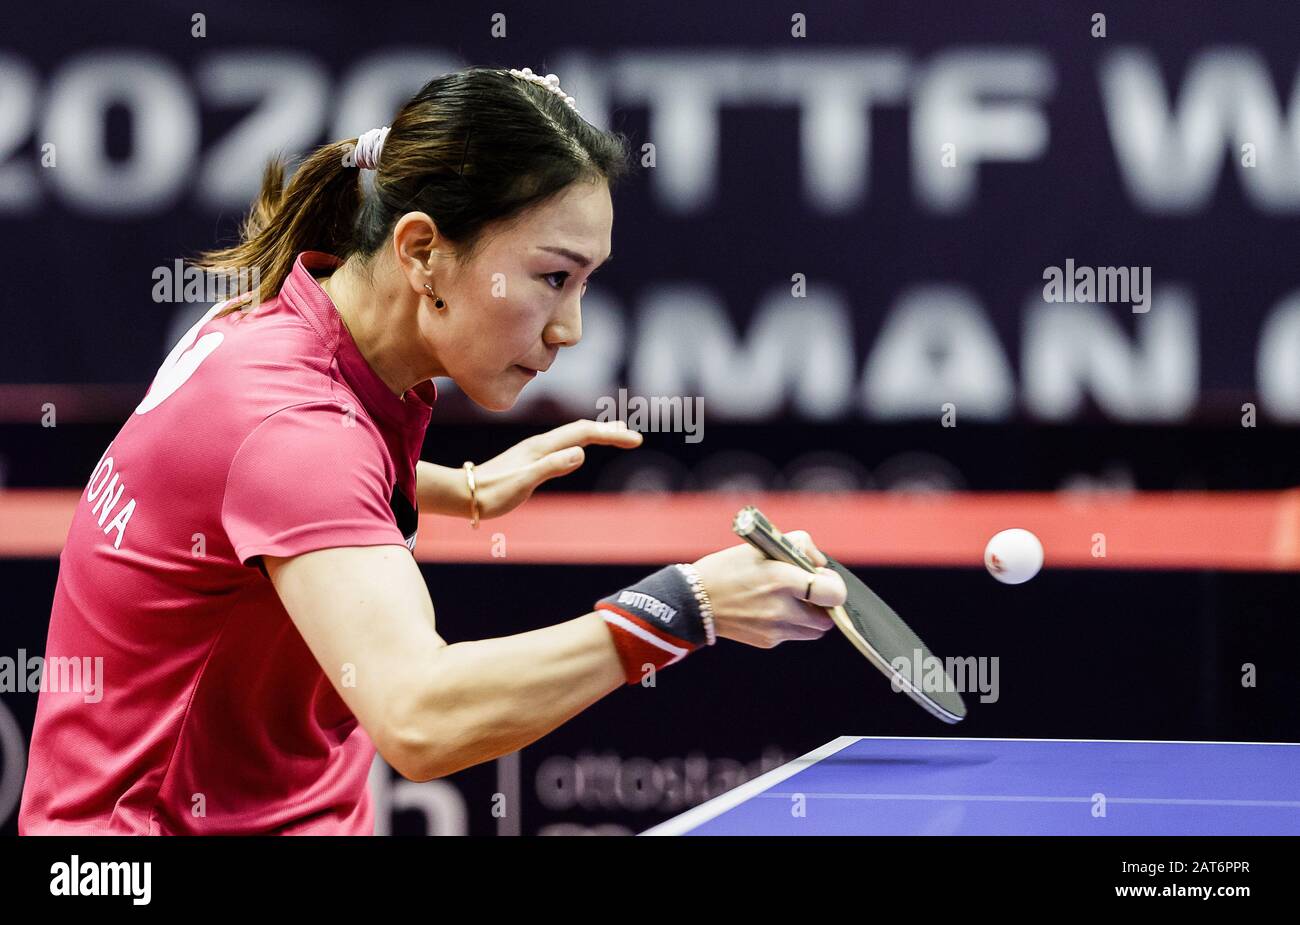 Magdeburg, Germany. 30th Jan, 2020. Shan Xiaona of Germany returns the ball  during the women's singles round of 32 match against Liu Shiwen of China at  the 2020 ITTF World Tour Platinum